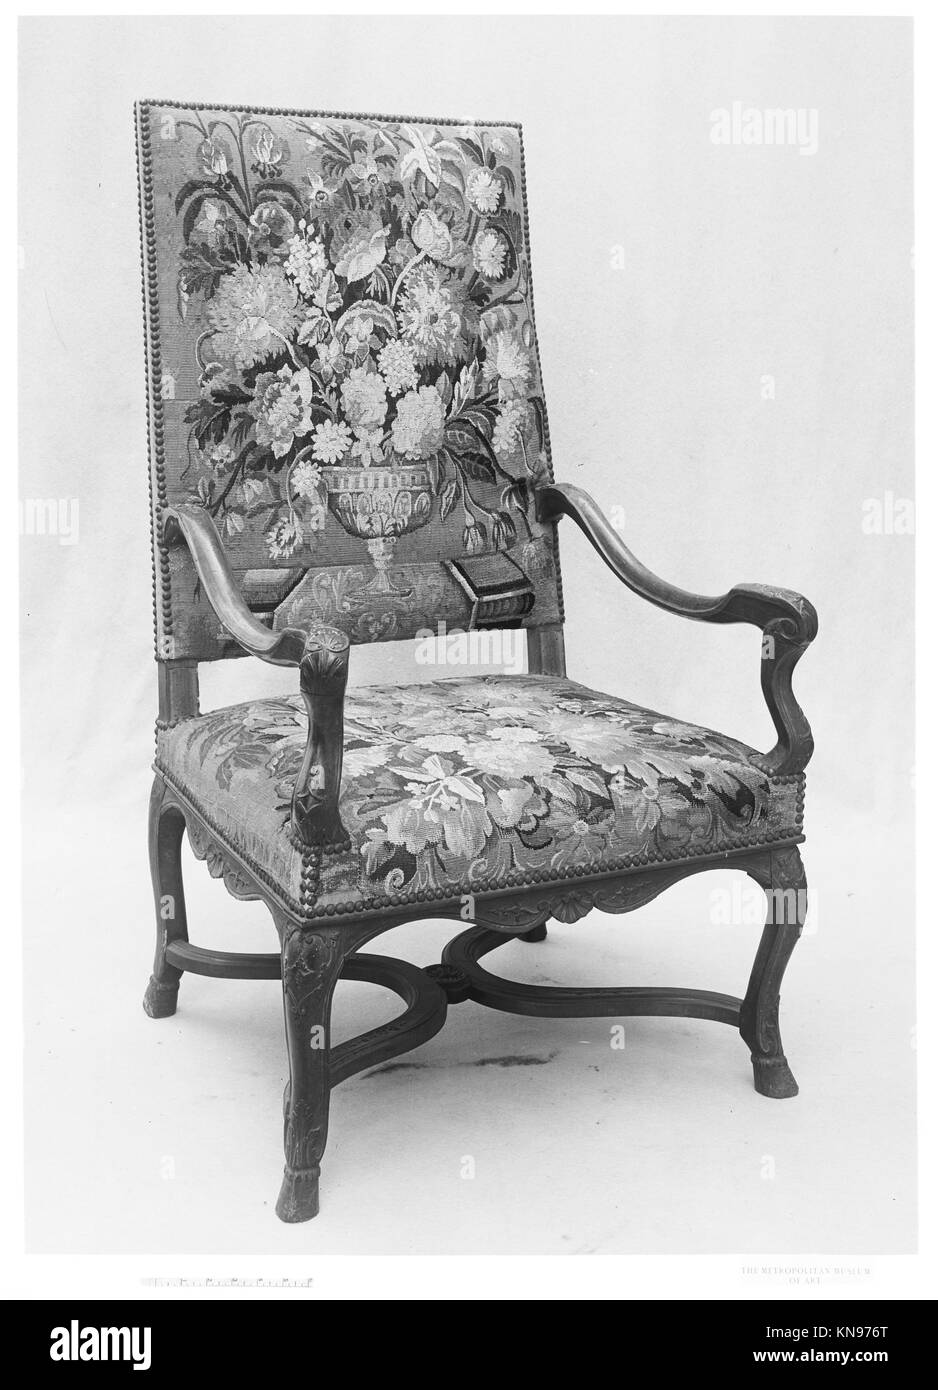 Armchair MET 4341 Armchair MET 4341 /189337 French, Armchair, late 17th?early 18th century, Carved walnut with Aubusson silk and wool tapestry covers, 46 1/2 ? 26 5/8 ? 22 in. (118.1 ? 67.6 ? 55.9 cm). The Metropolitan Museum of Art, New York. Gift of J. Pierpont Morgan, 1906 (07.225.51) Stock Photo